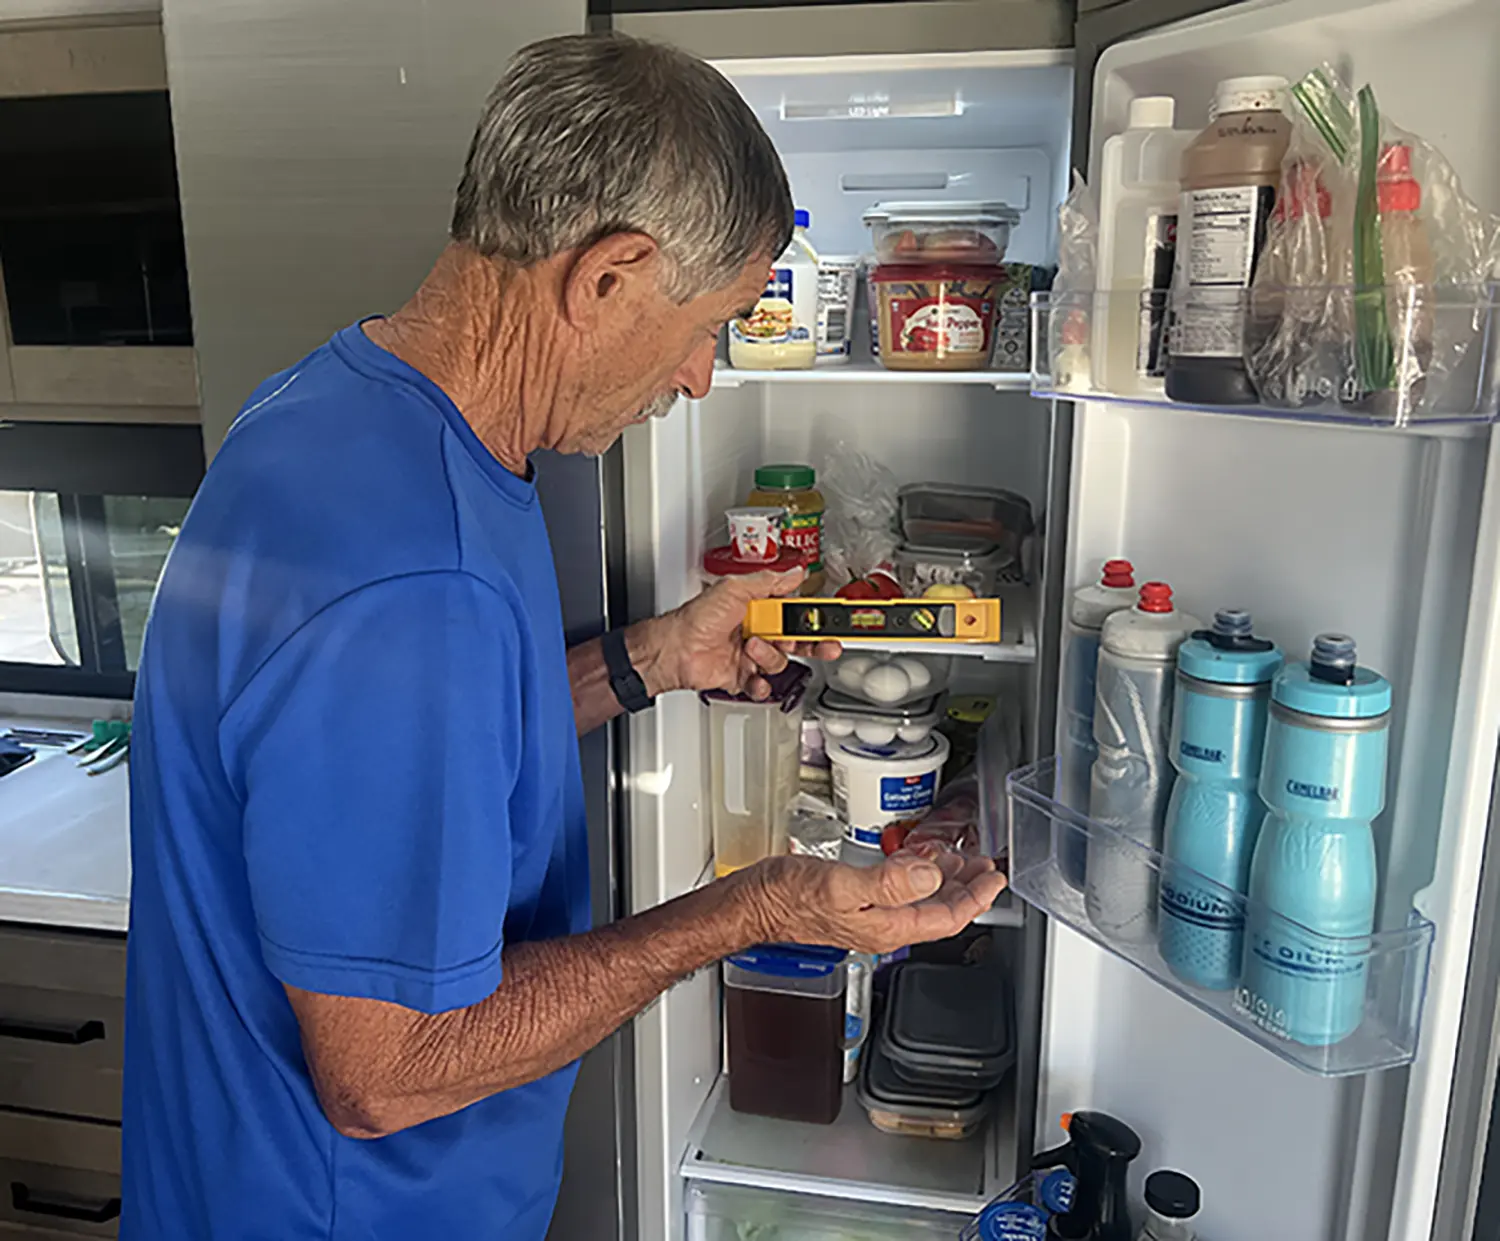 Indoor RV close-up photograph perspective of Bill Gehr in a blue shirt glancing downward at a yellow digital protractor device tool while holding the tool in his left hand as the refrigerator door is open